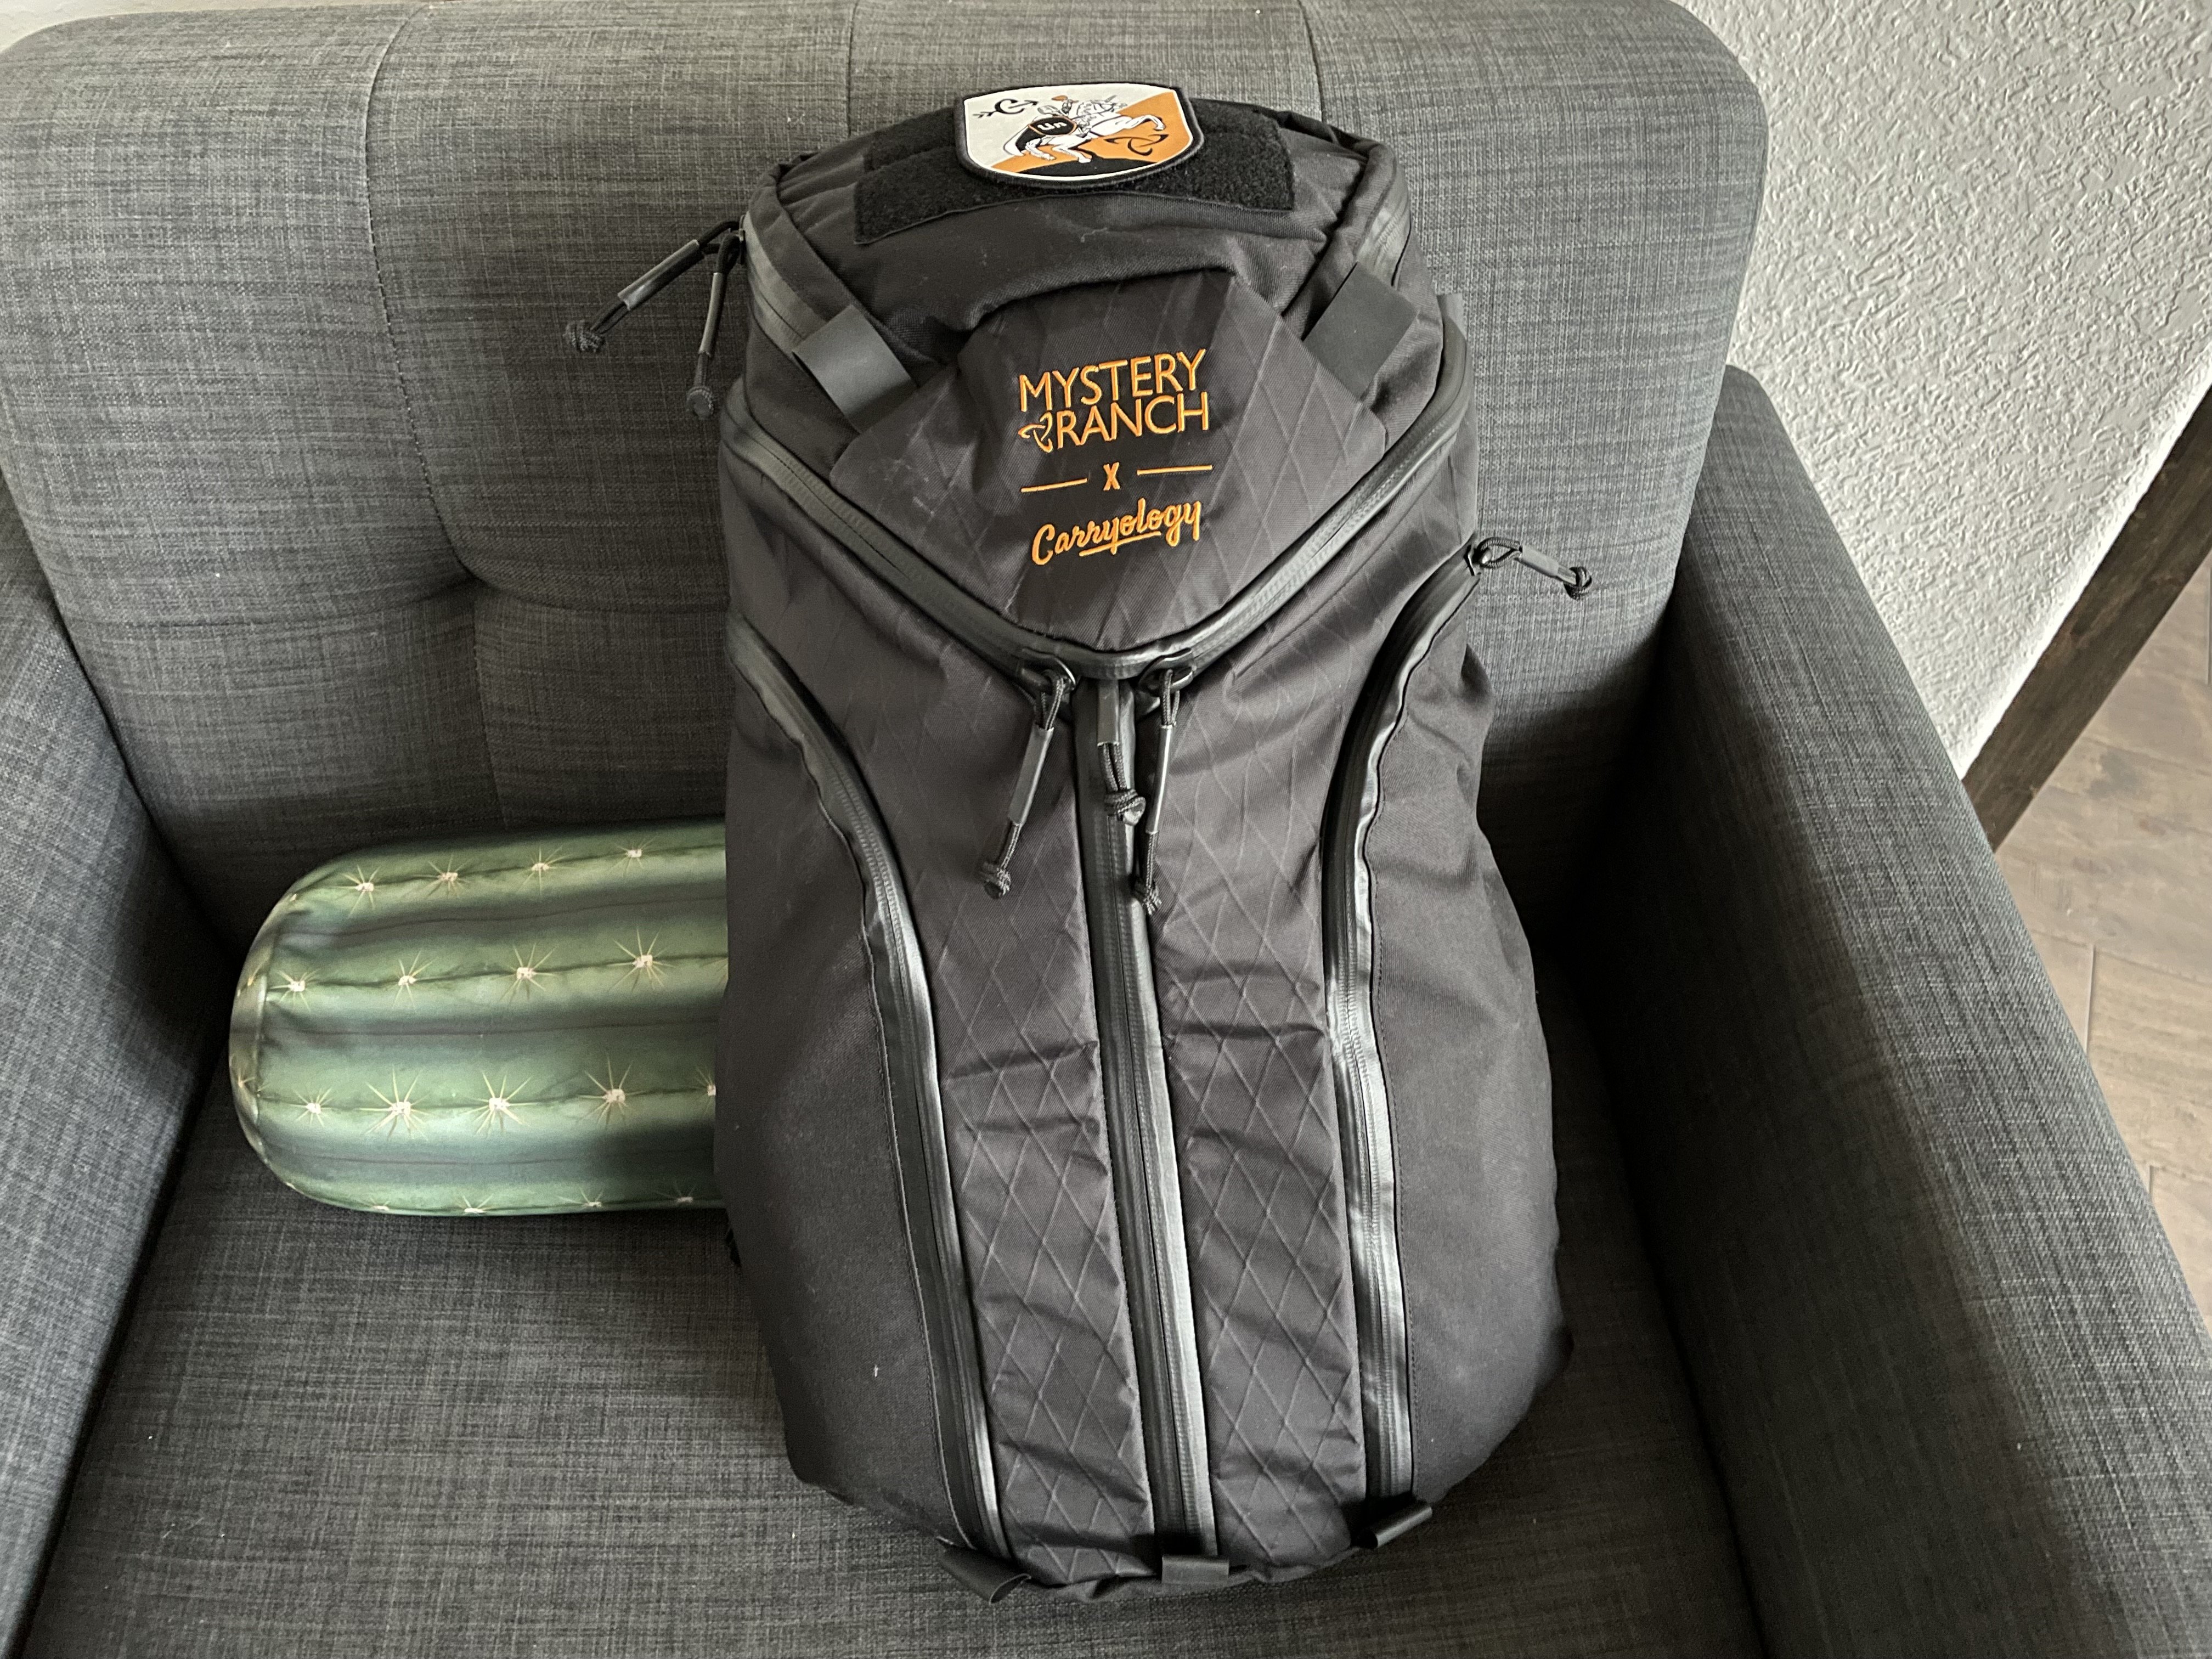 Mystery Ranch x Carryology Assault, aka 'Unicorn' – The Brooks Review